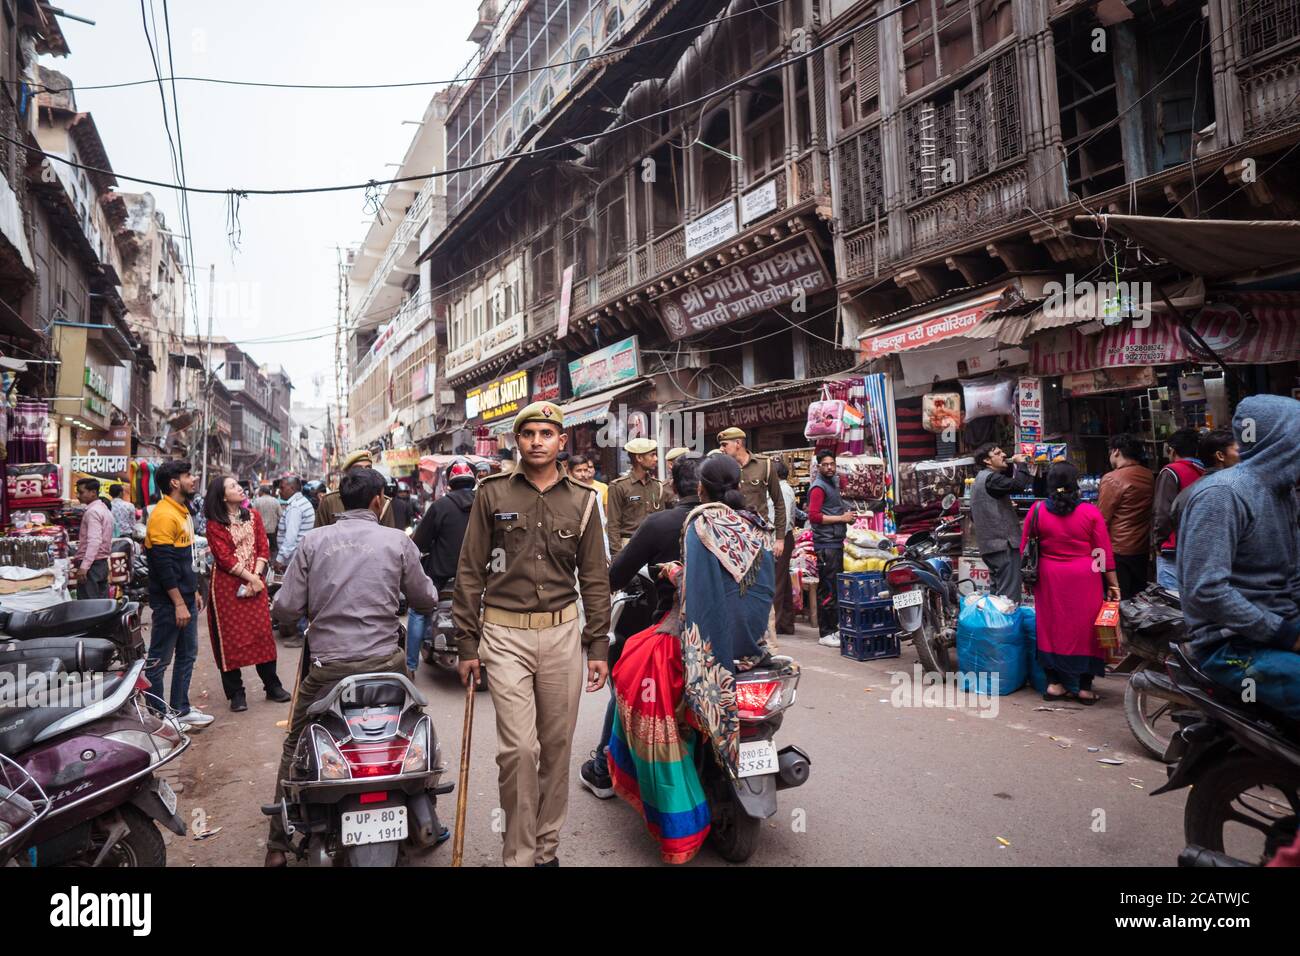 Agra / India - February 22, 2020: Environmental portrait of young military man walking holding stick through busy street in downtown Agra Stock Photo